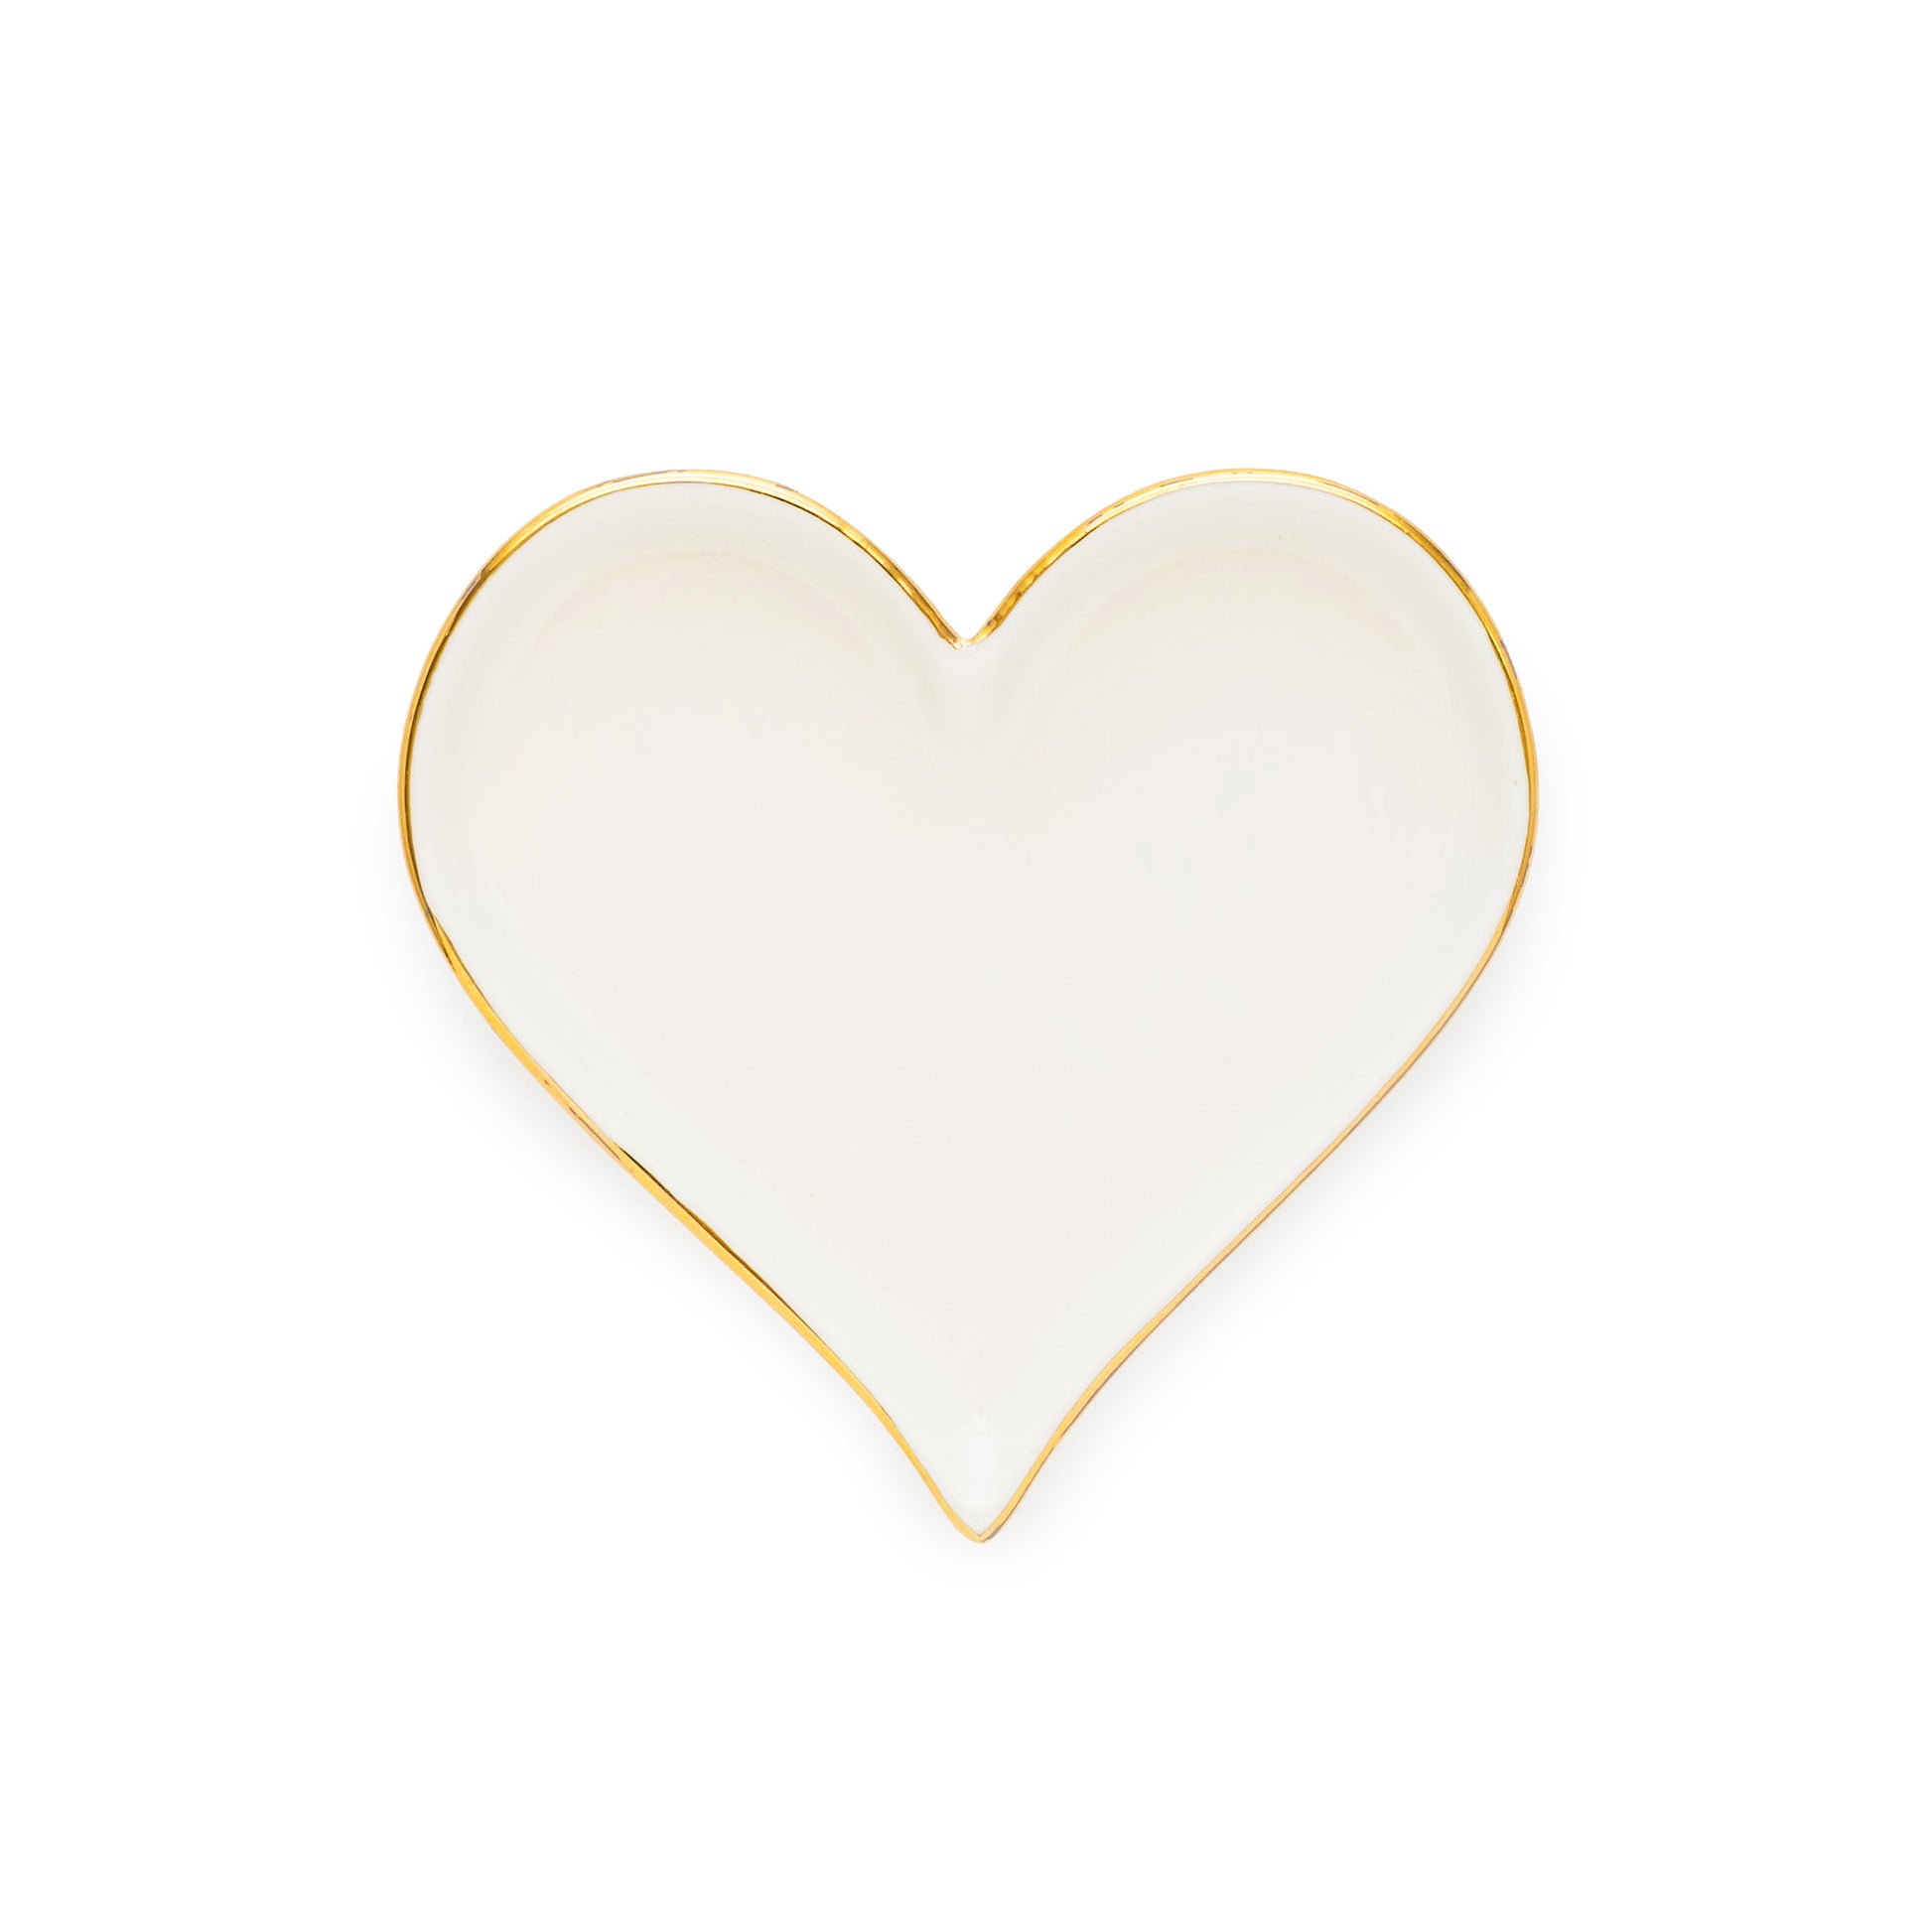 pale pink ceramic heart tray with gold border